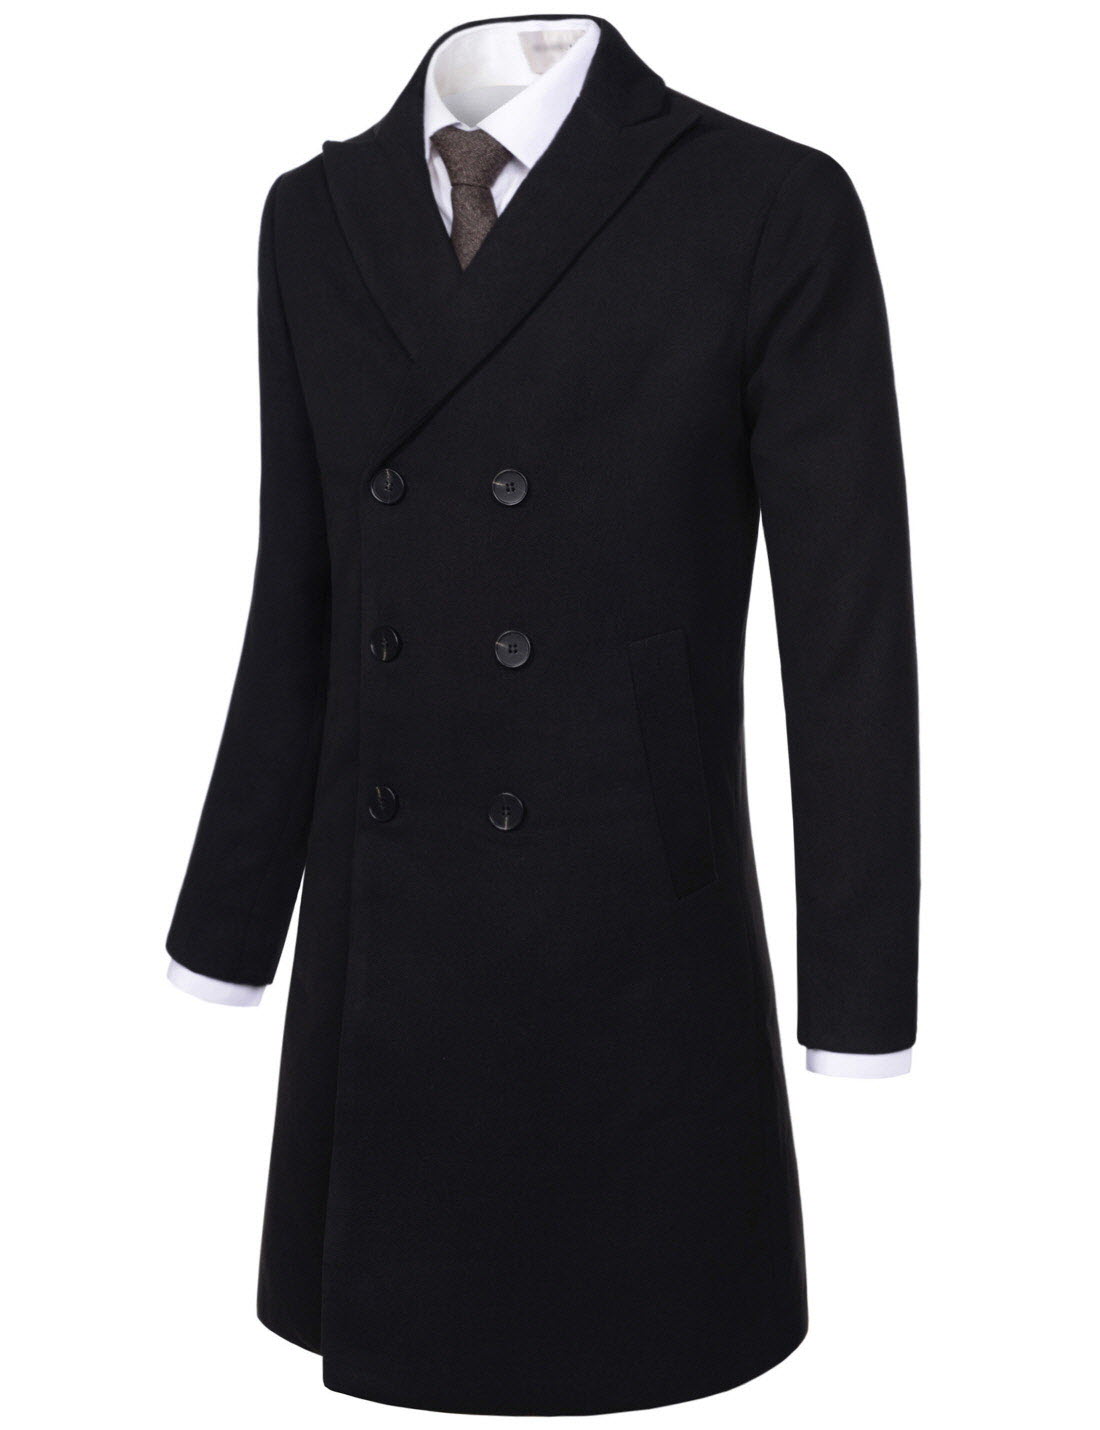 (NKDC7053) TheLees Mens Double Breasted Peaked Lapel Wool Blend Long Coat